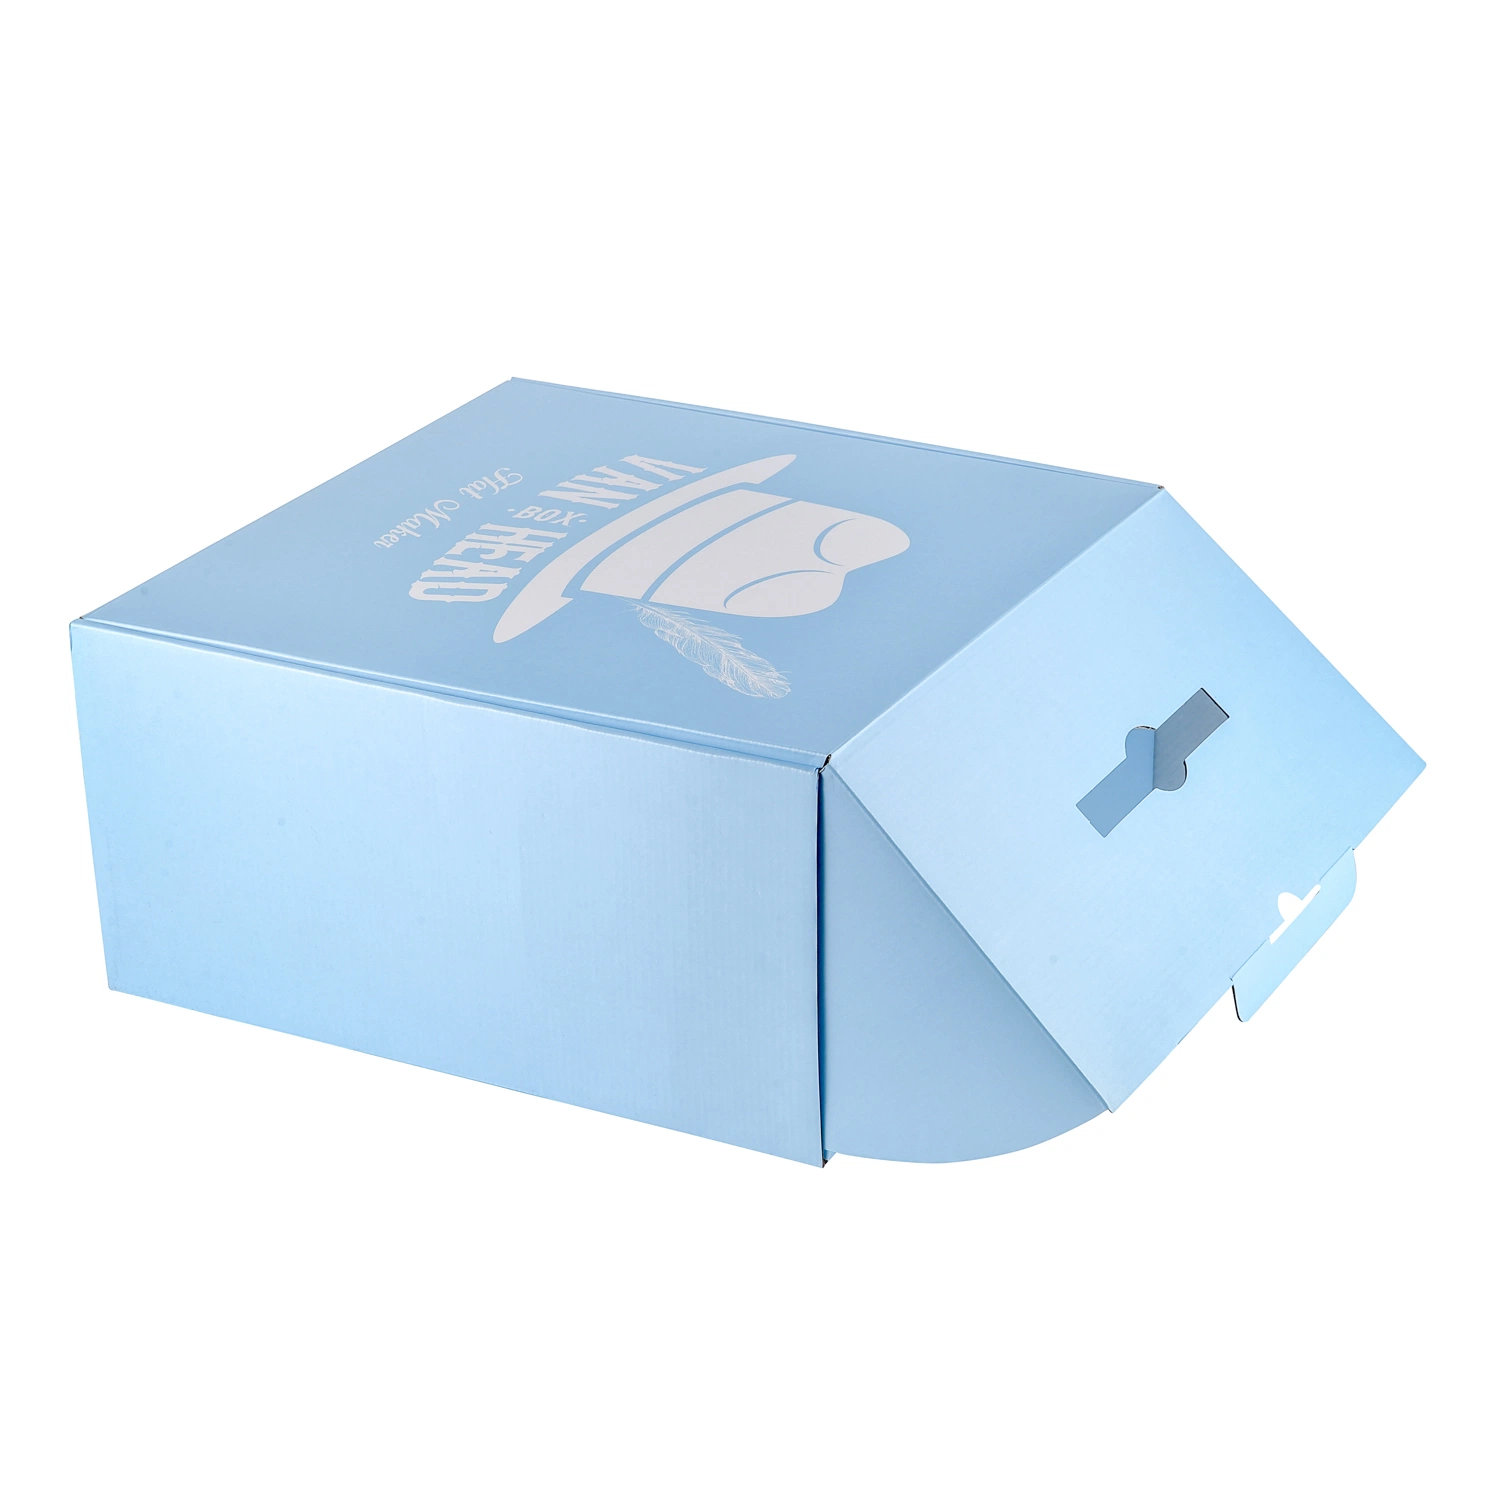 Full Blue Color Printing Carton Shipping Box Package for New Fashion Men Kids Winter Wool Hats